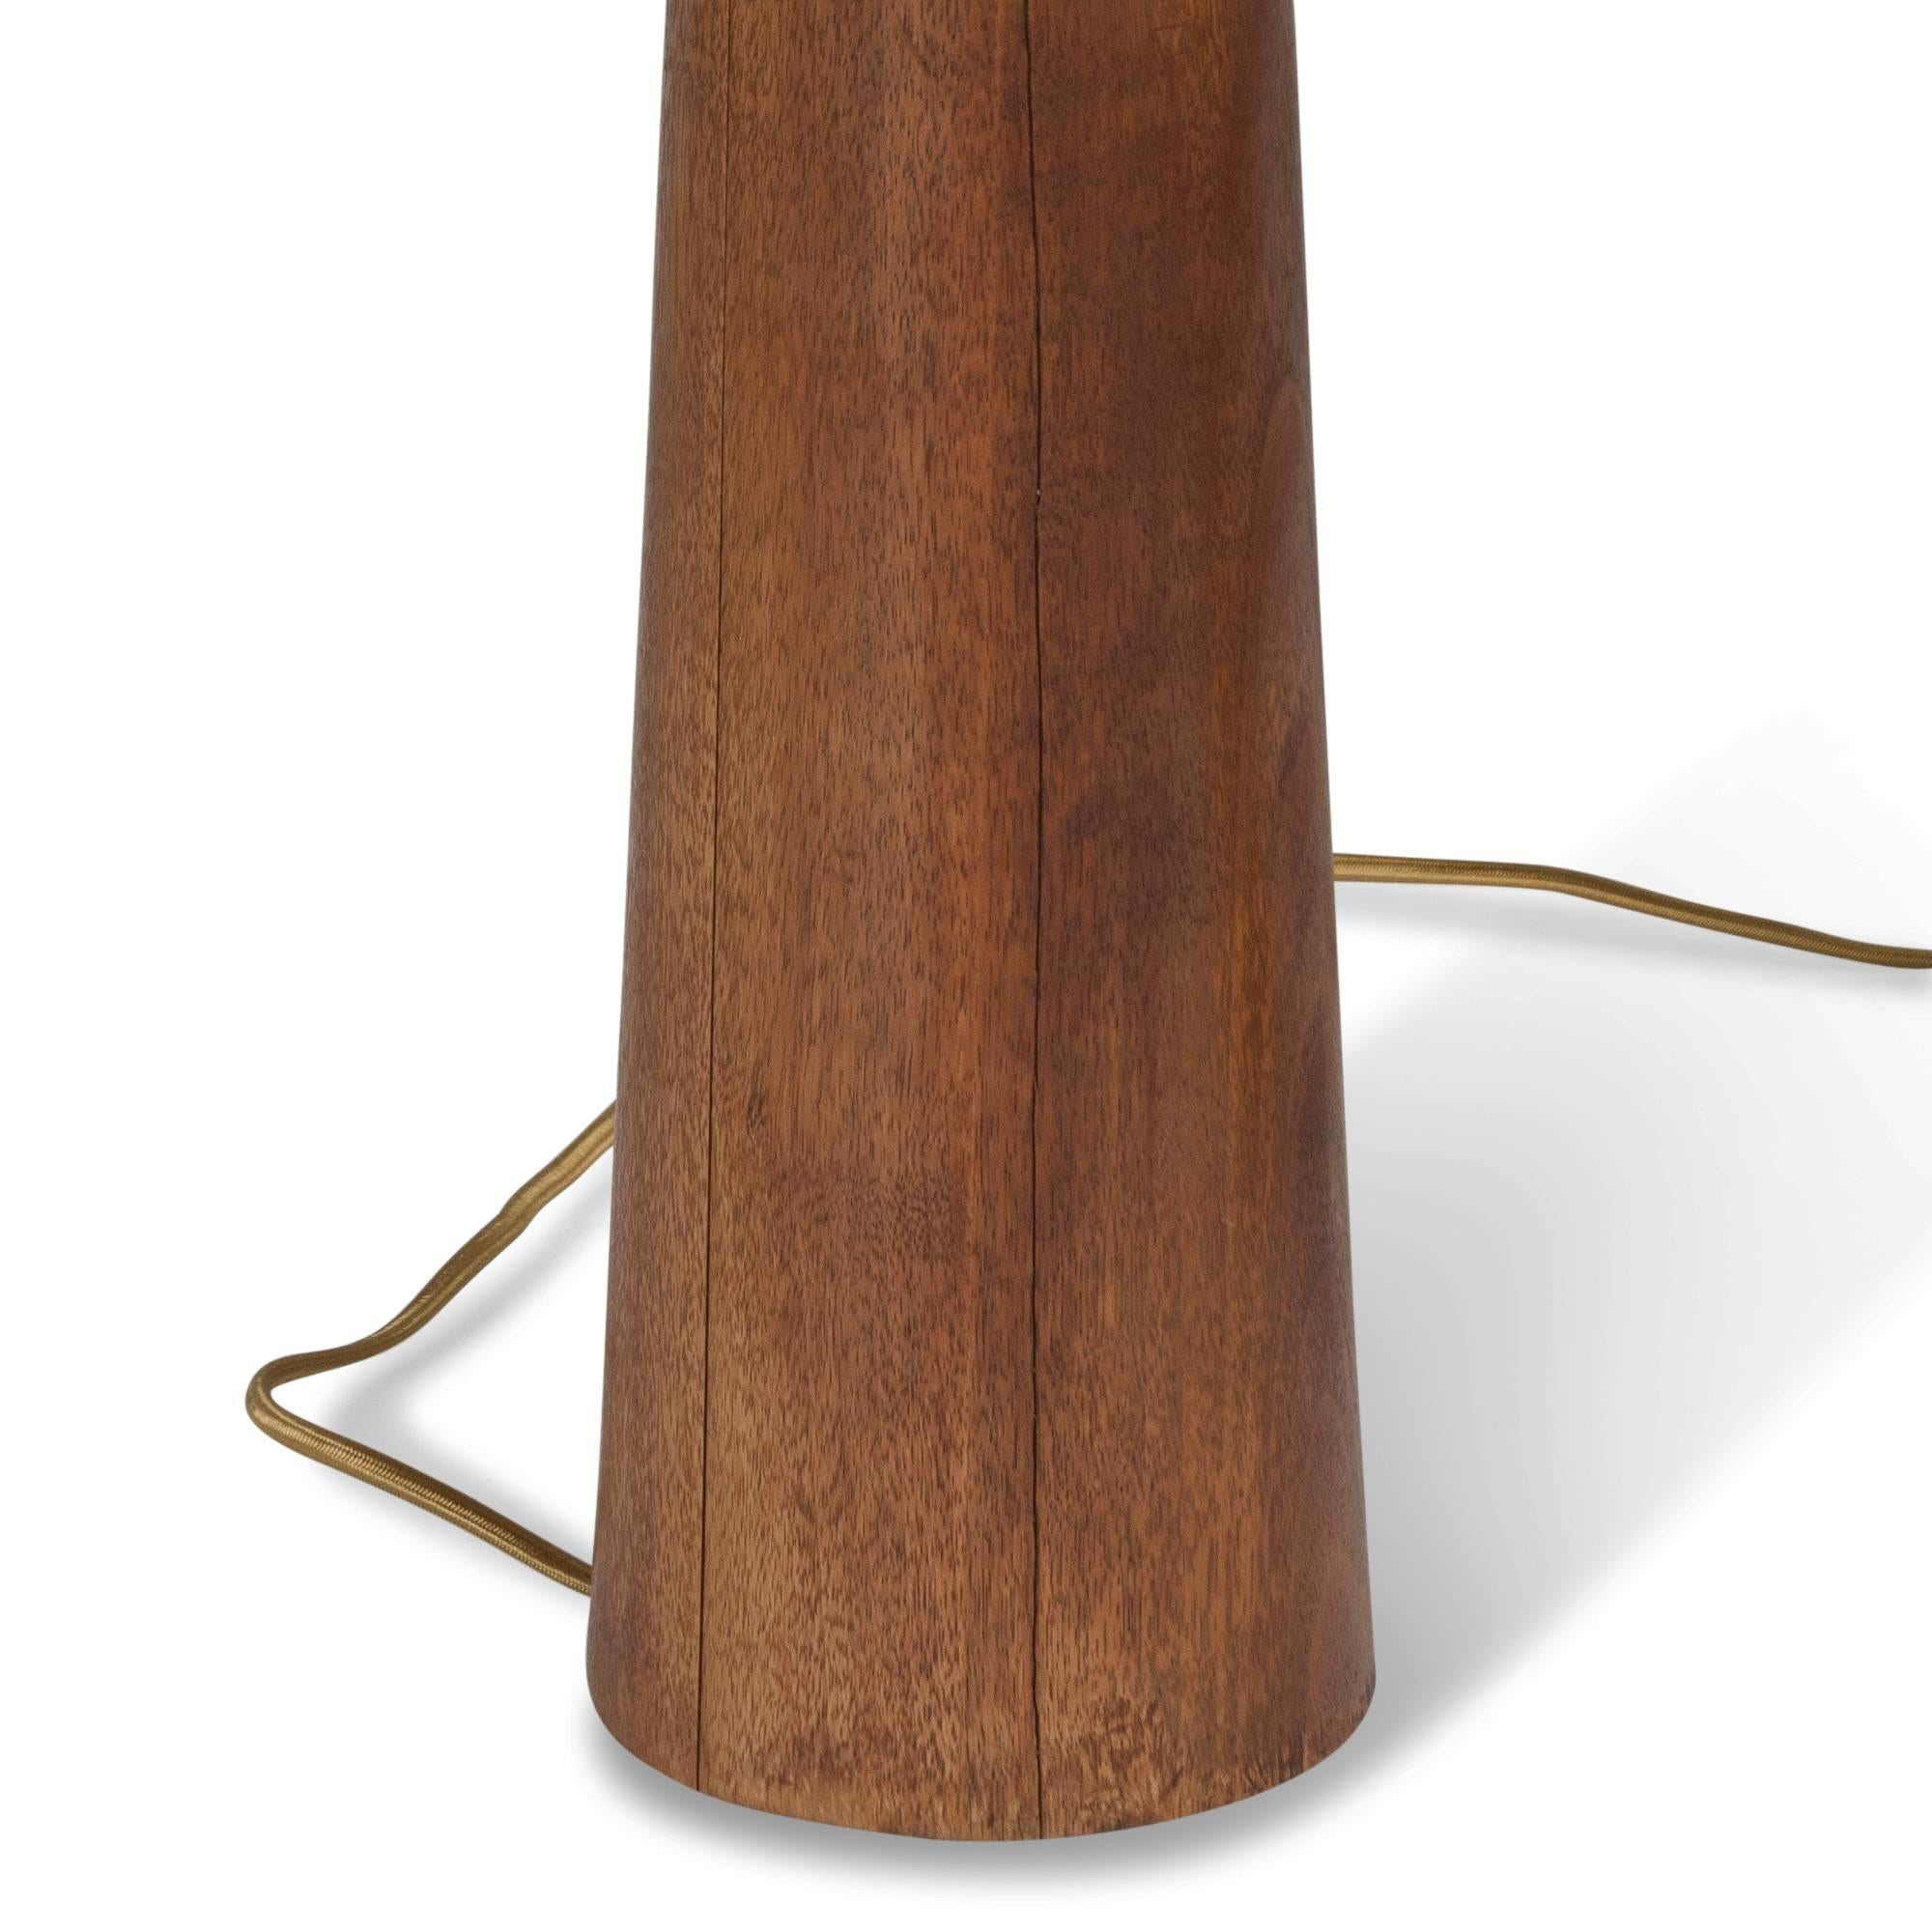 Mid-20th Century Pair of Turned Solid Mahogany Table Lamps, Danish, 1950s For Sale